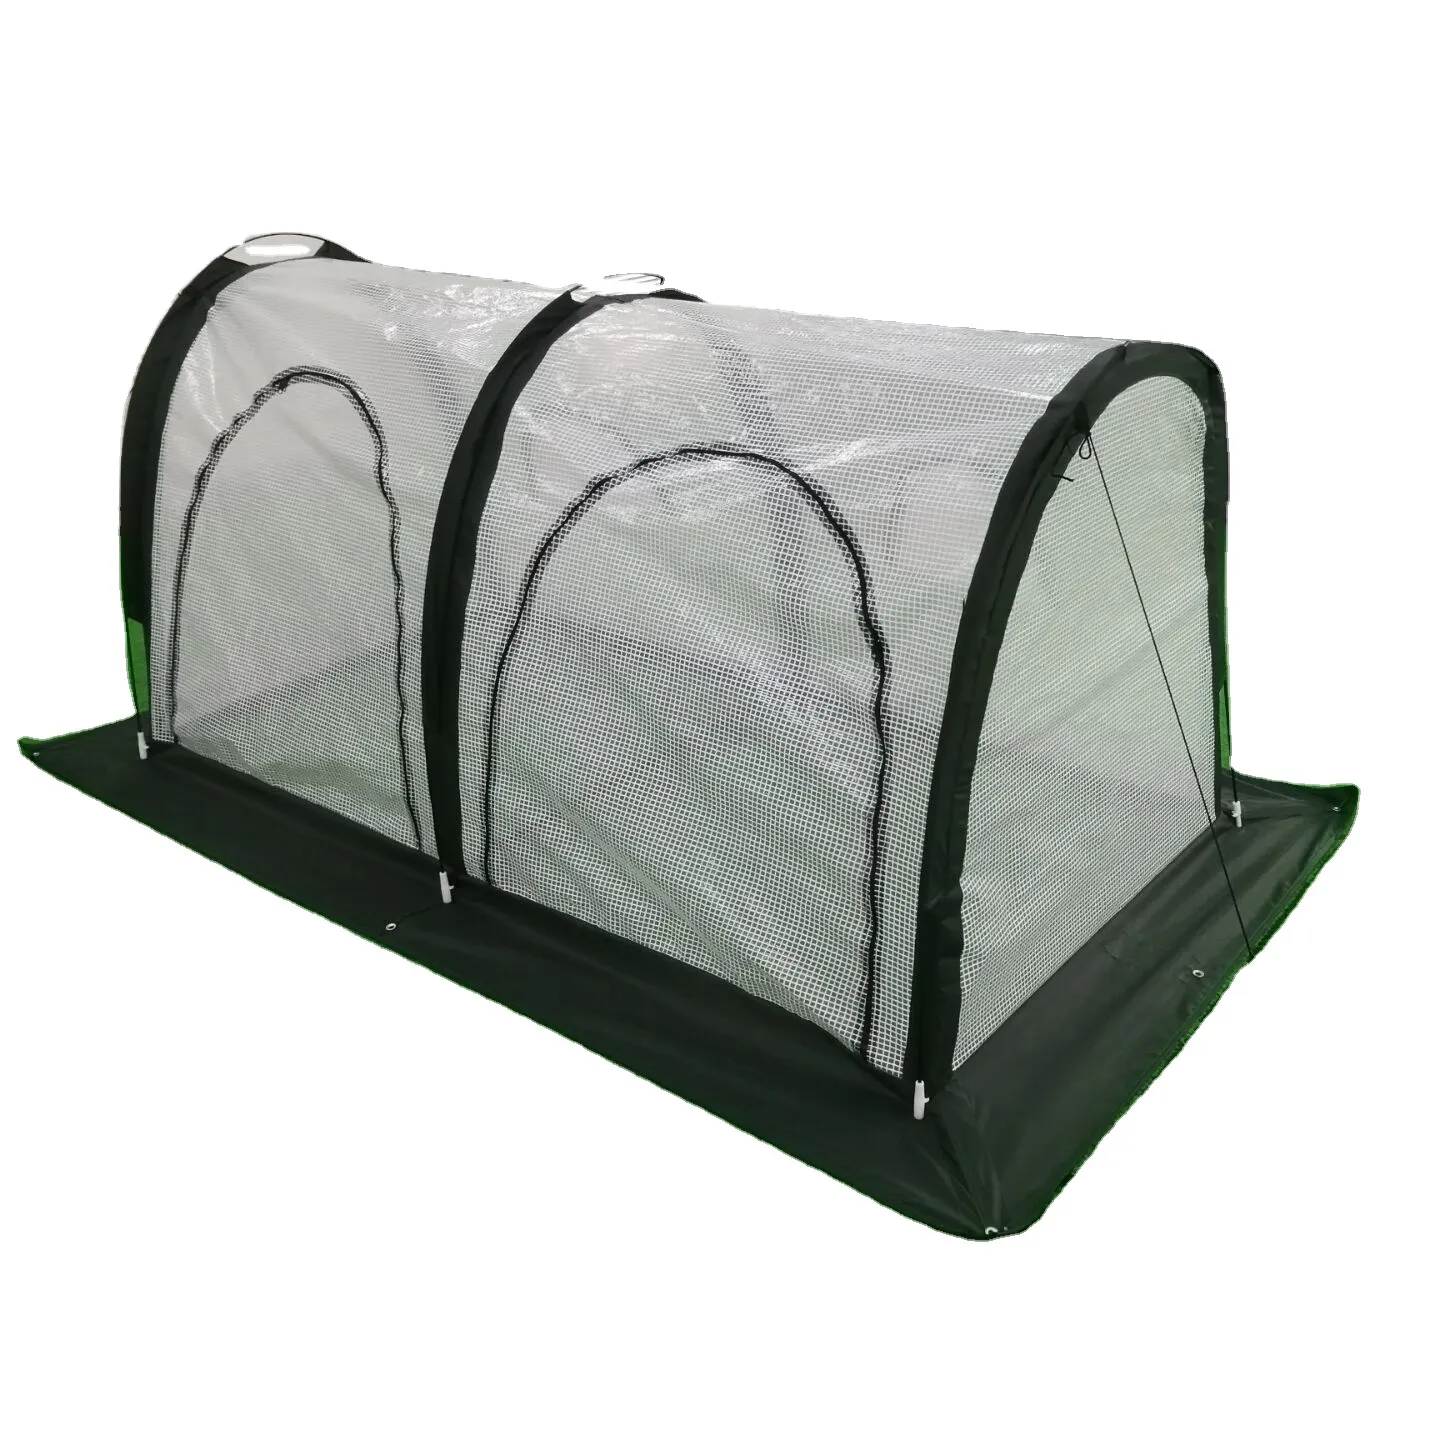 Mini type portable poly grow tunnel sturdy and durable plant cover for winter flower protector